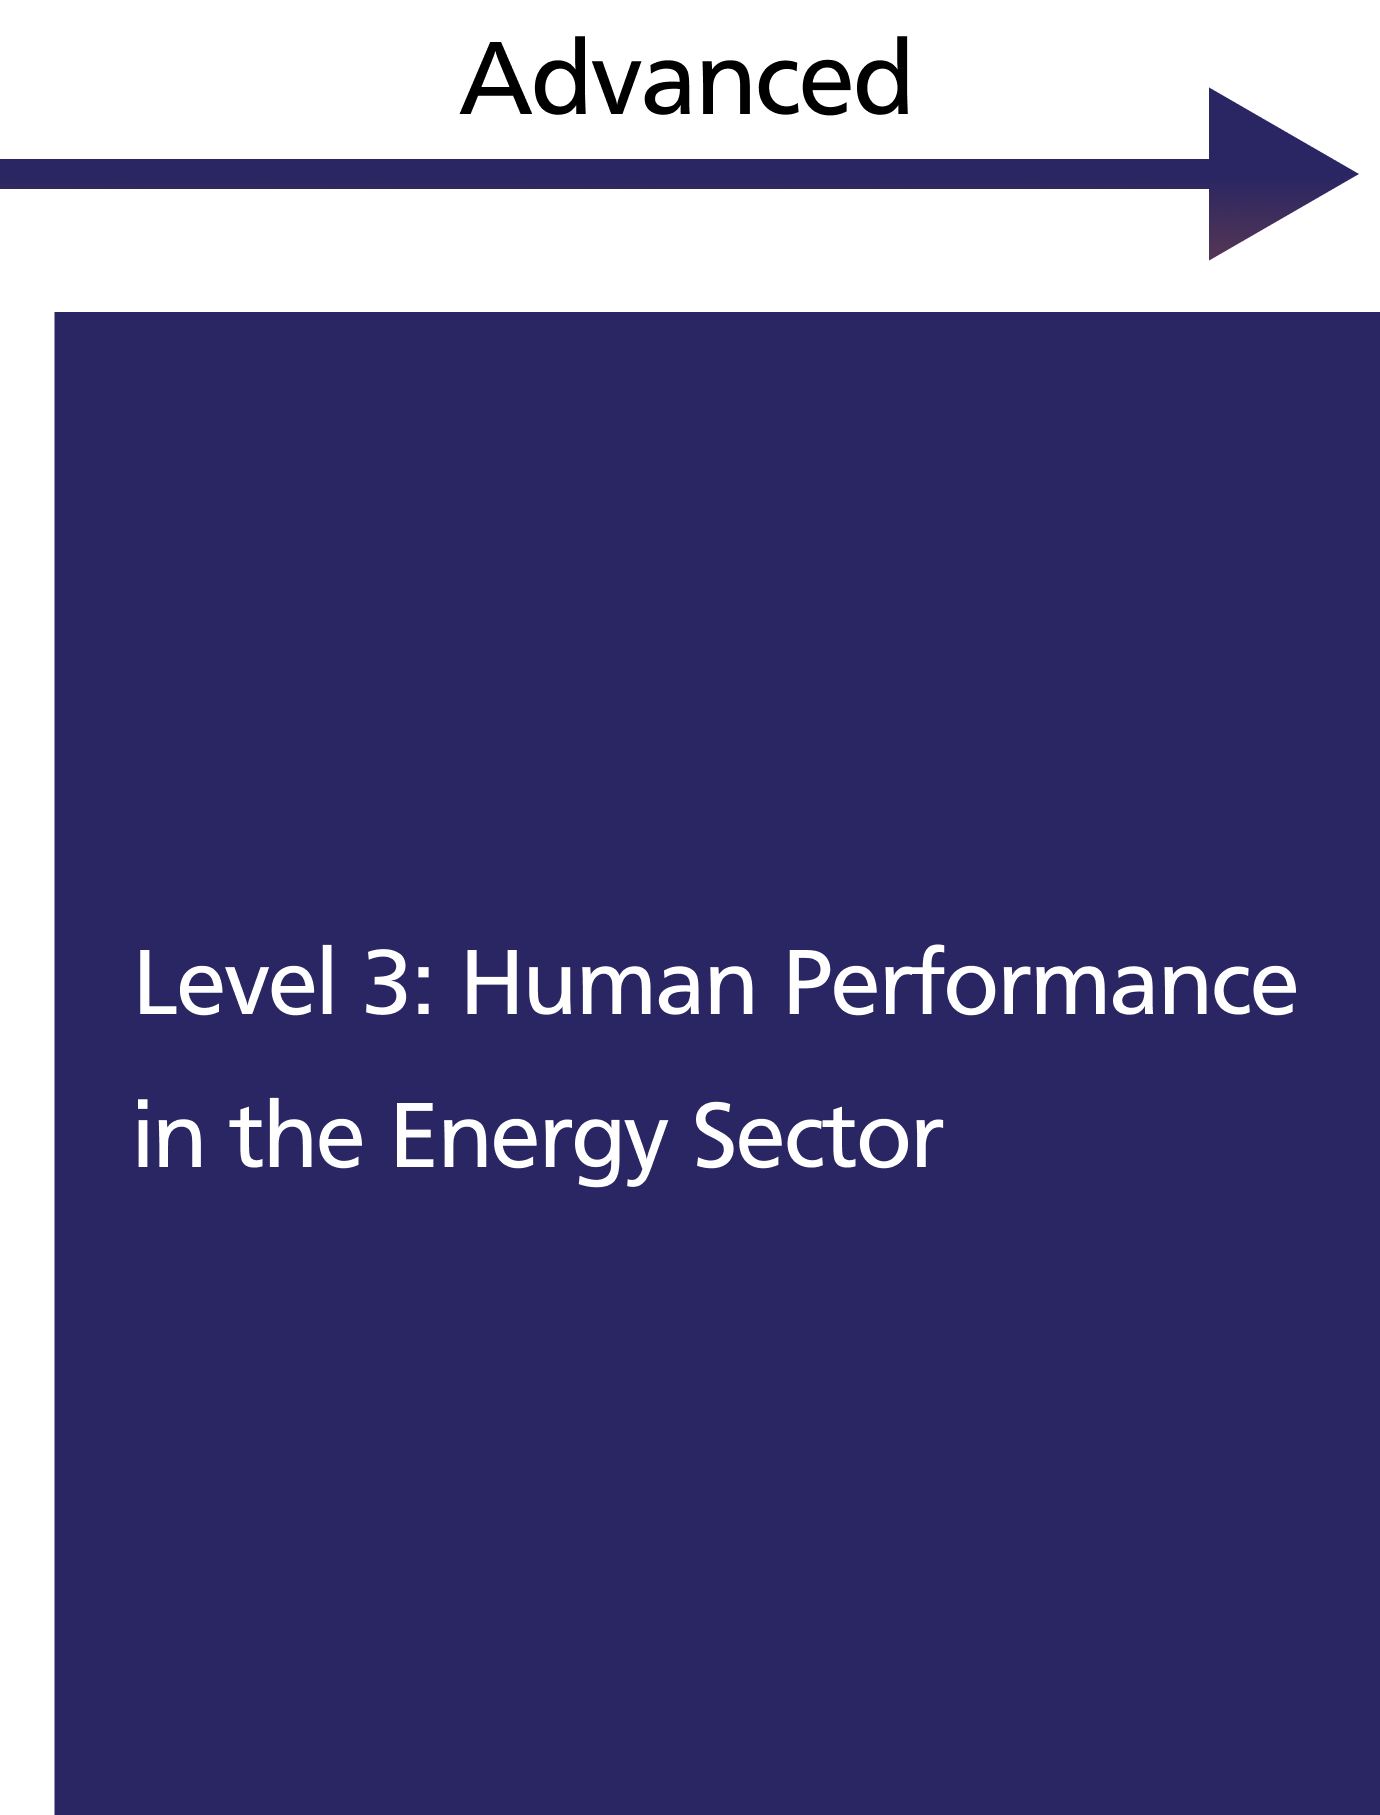 Level 3: Human Performance in the Energy Sector